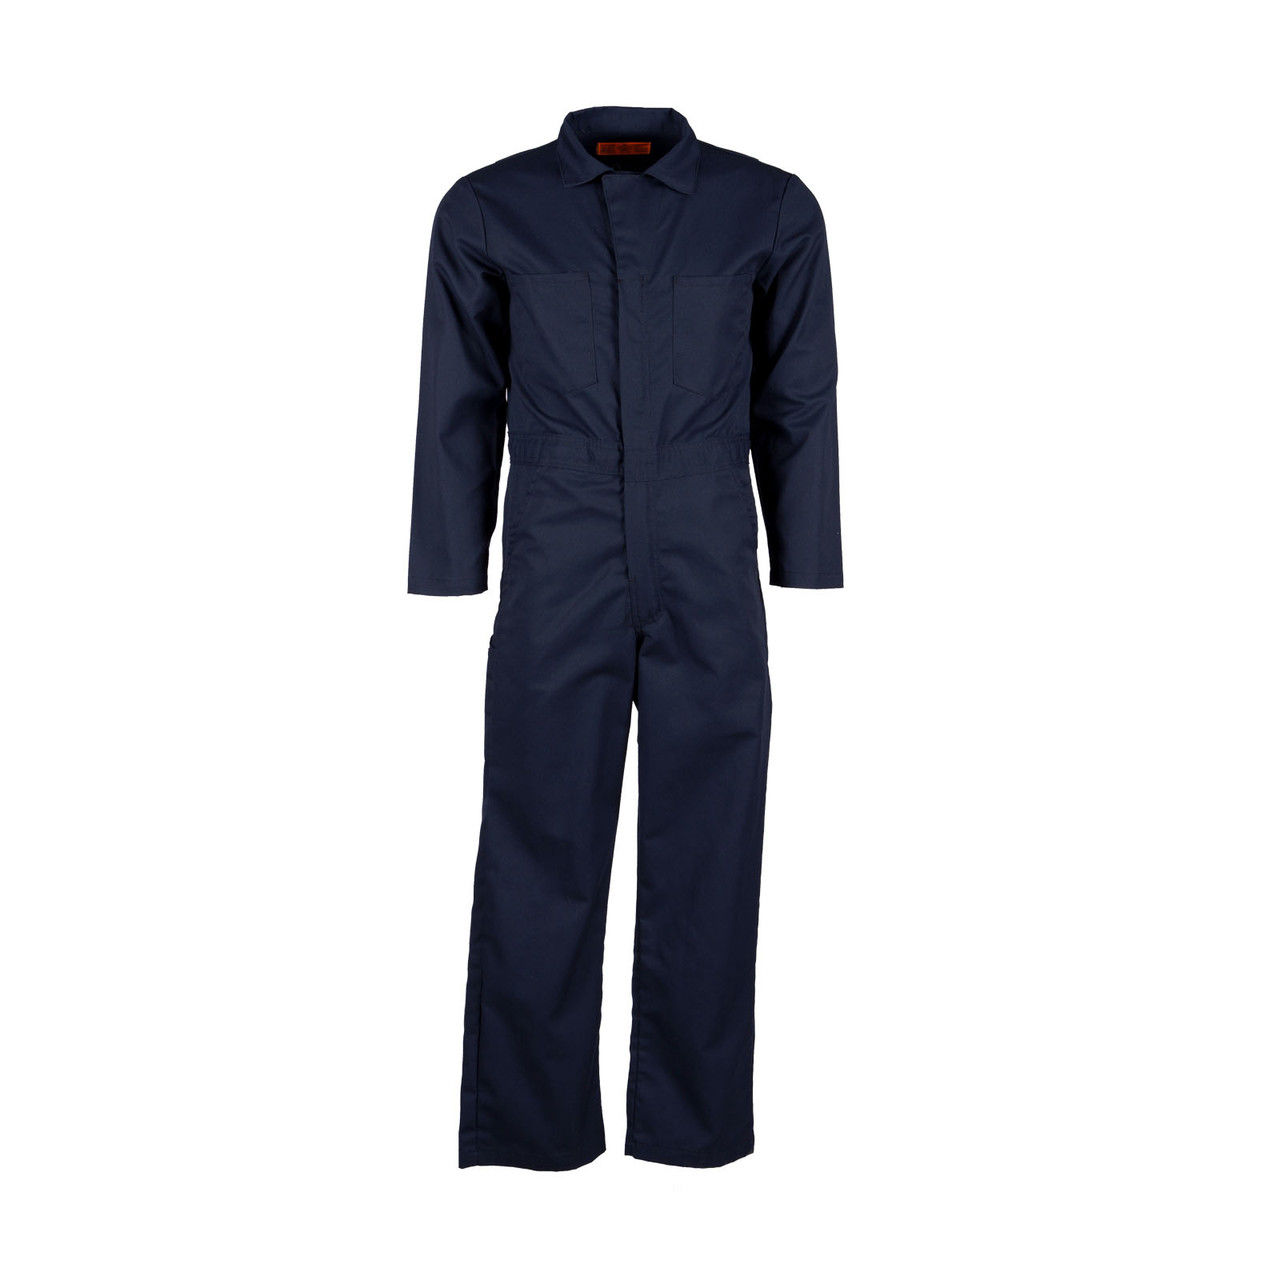 What kind of zipper is featured on the CV10NV navy coveralls by Pinnacle Textile?